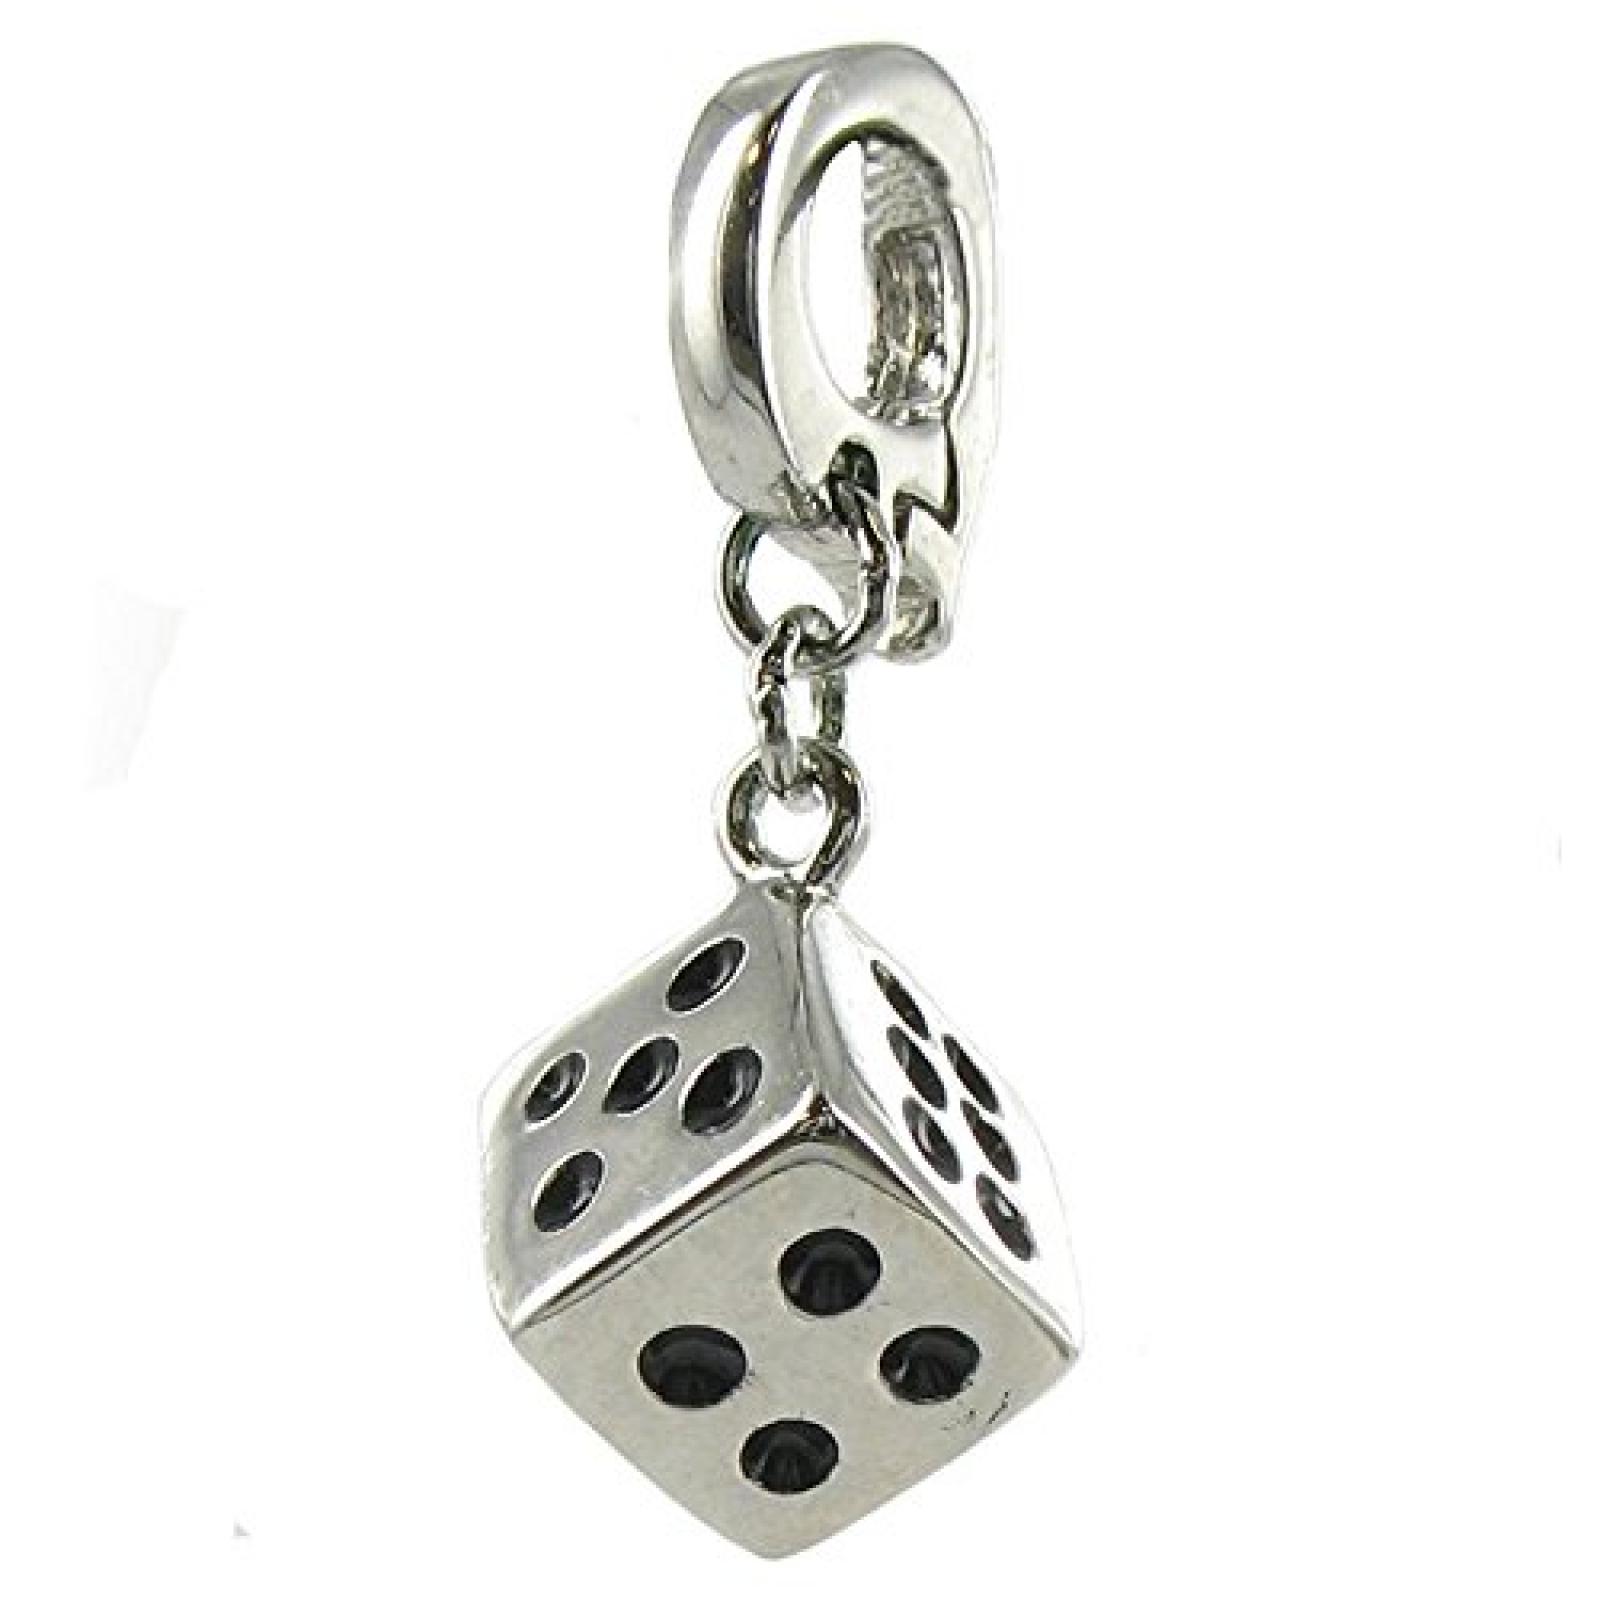 Quiges, Eligo Charms Silver Plated Dice für Viventy/Fossil 5mm Leather Armbands 